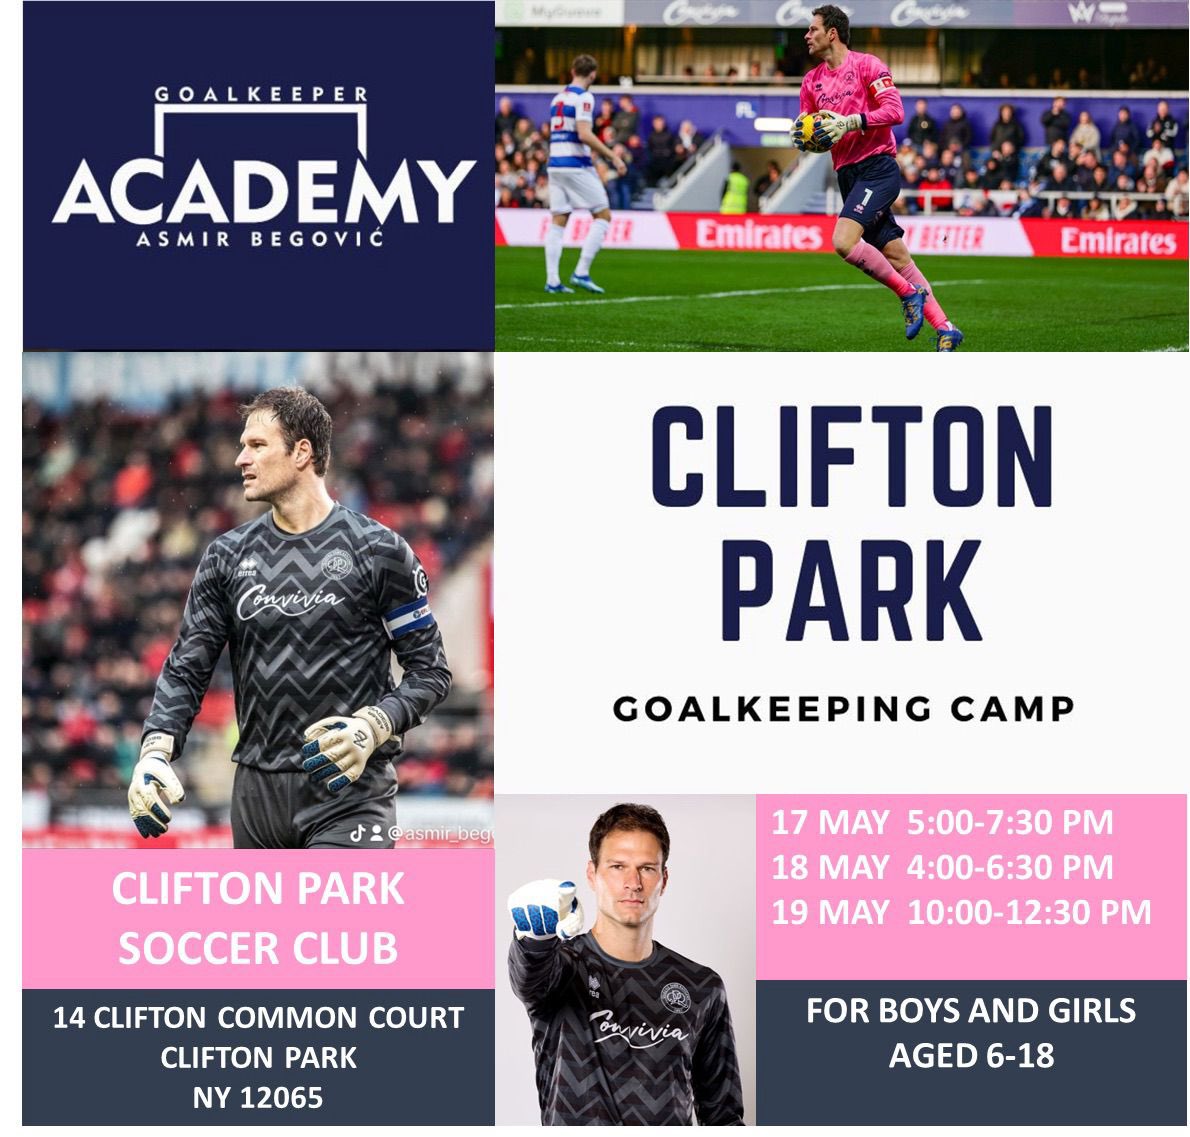 After our successful first camp last fall we are back again for another camp in Clifton Park! We can’t wait to get back and put on another weekend of goalkeeping fun and education. Sign up now! 🆎🧤🇺🇸 system.gotsport.com/programs/1T519… #ab1 #camp #goalkeeping #cliftonpark #goalkeeping